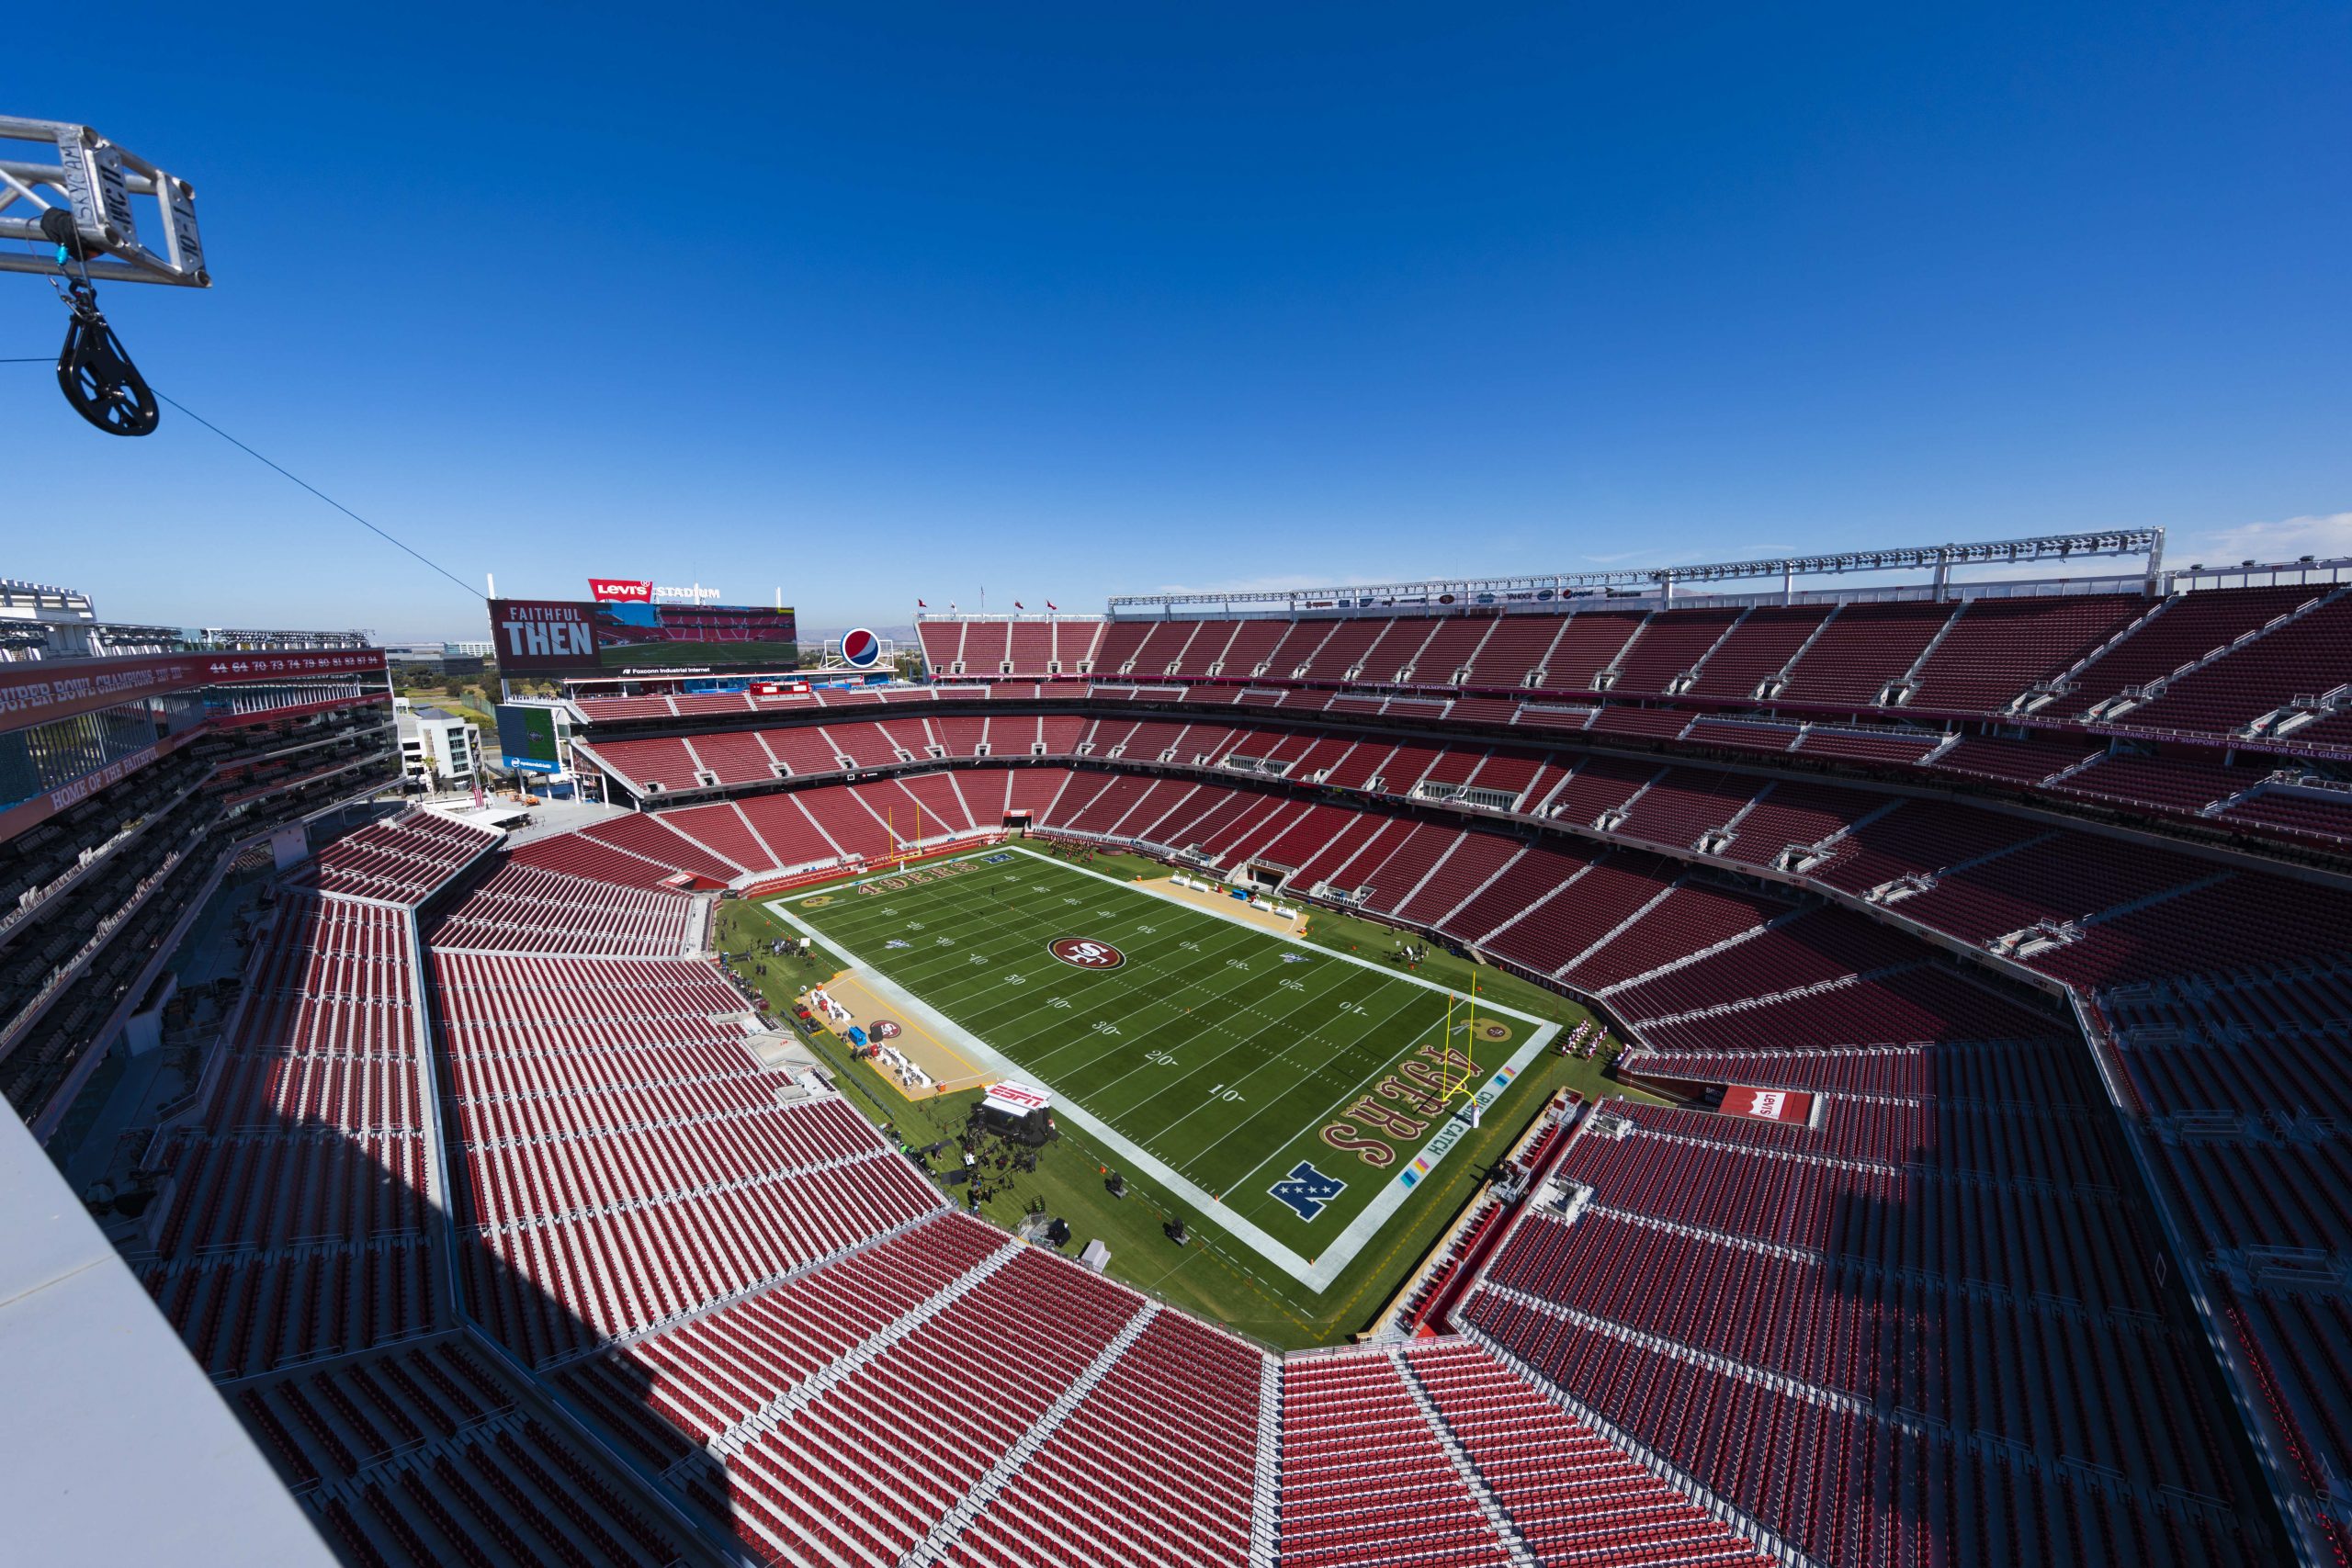 General view of the interior of Levis Stadium from an elevated level during the NFL regular season ...